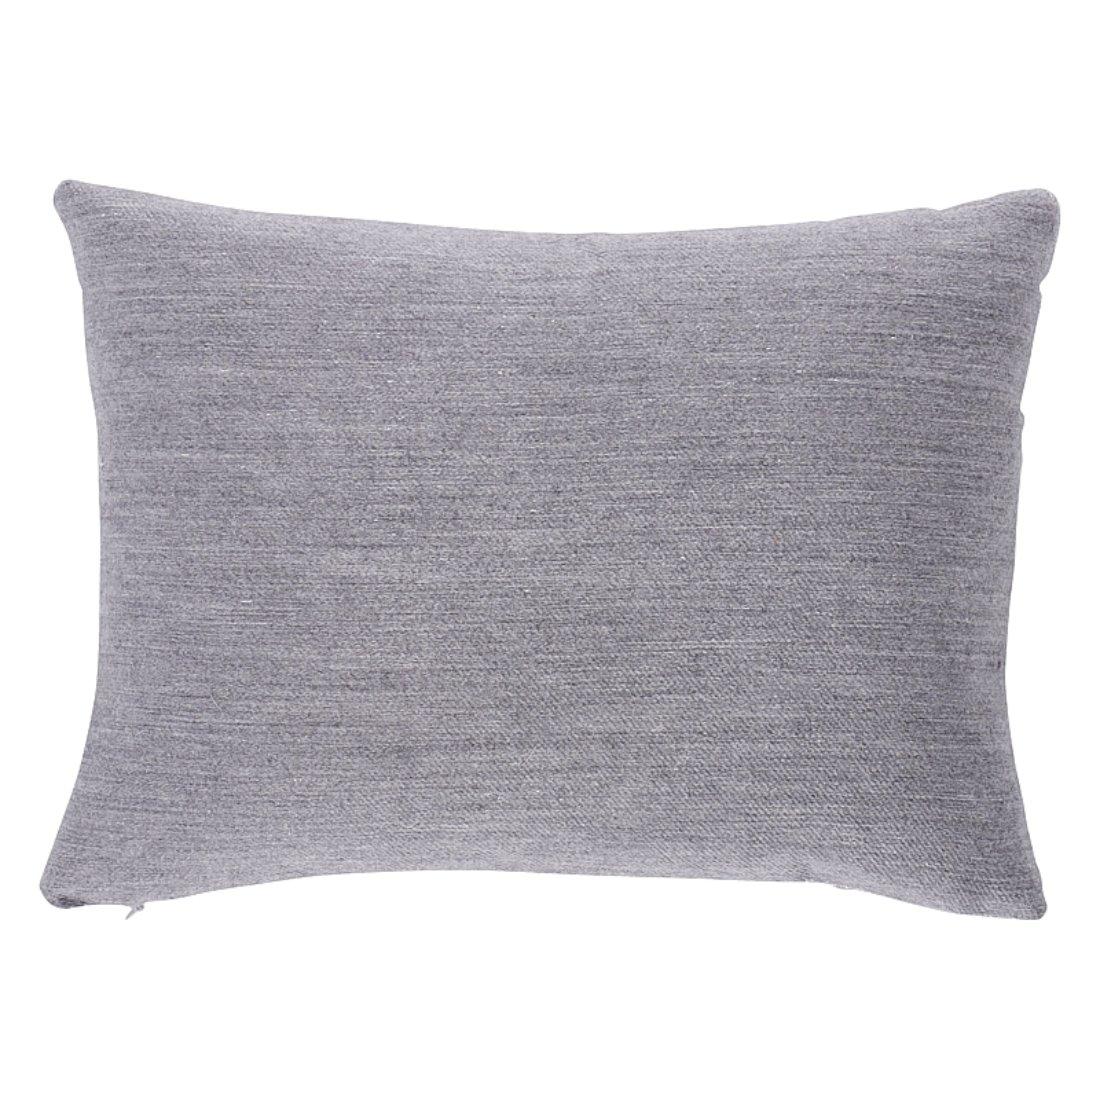 This pillow features Argento with a knife edge finish. Woven at an Italian fashion mill, this double-faced cashmere has a metallic sheen on one side. Its sumptuous hand and silky drape make it the ultimate expression of sophistication. Pillow